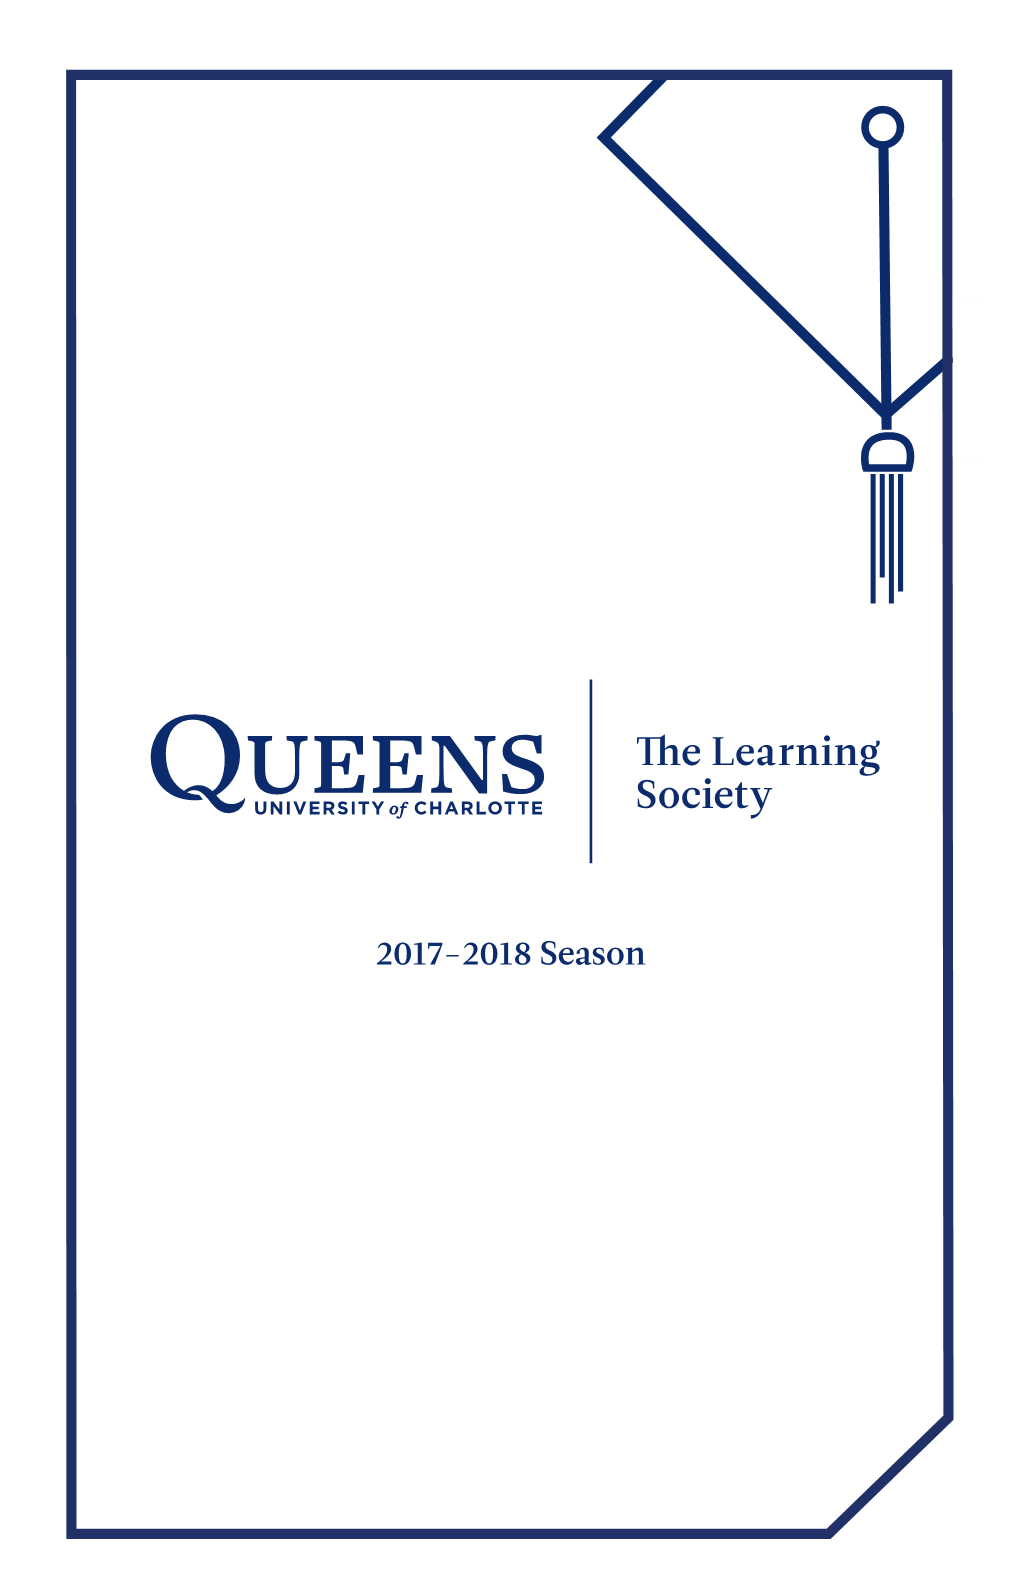 The Learning Society 2017-2018